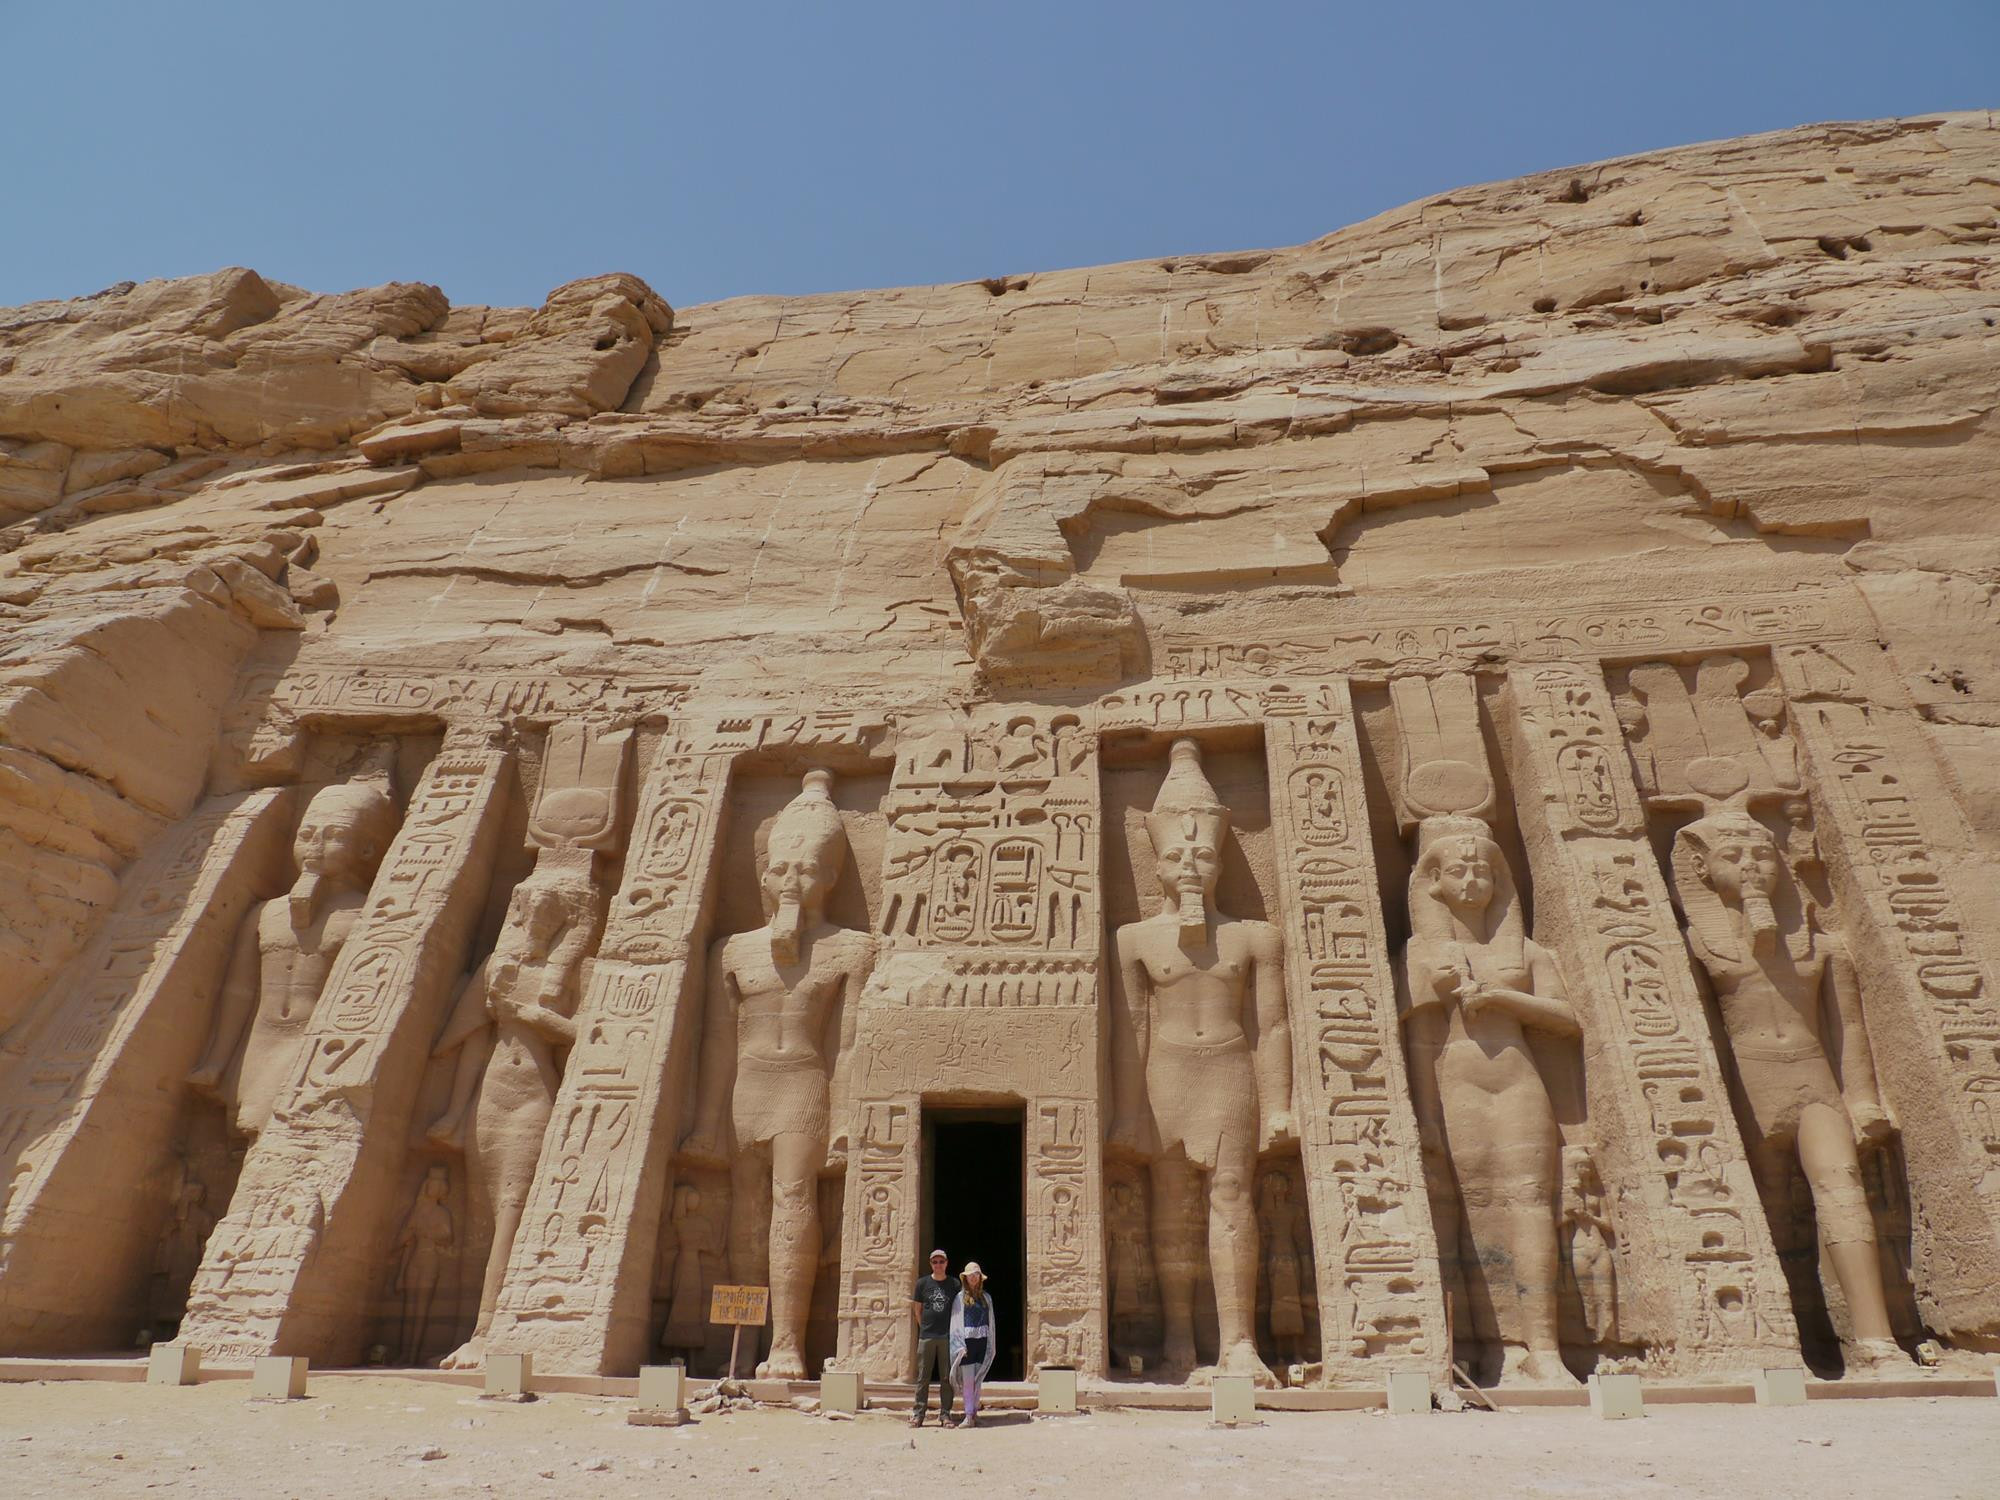 The entrance to the 'Small Temple' of Nefertari, Abu Simbel. Both temples extend deep into the hill